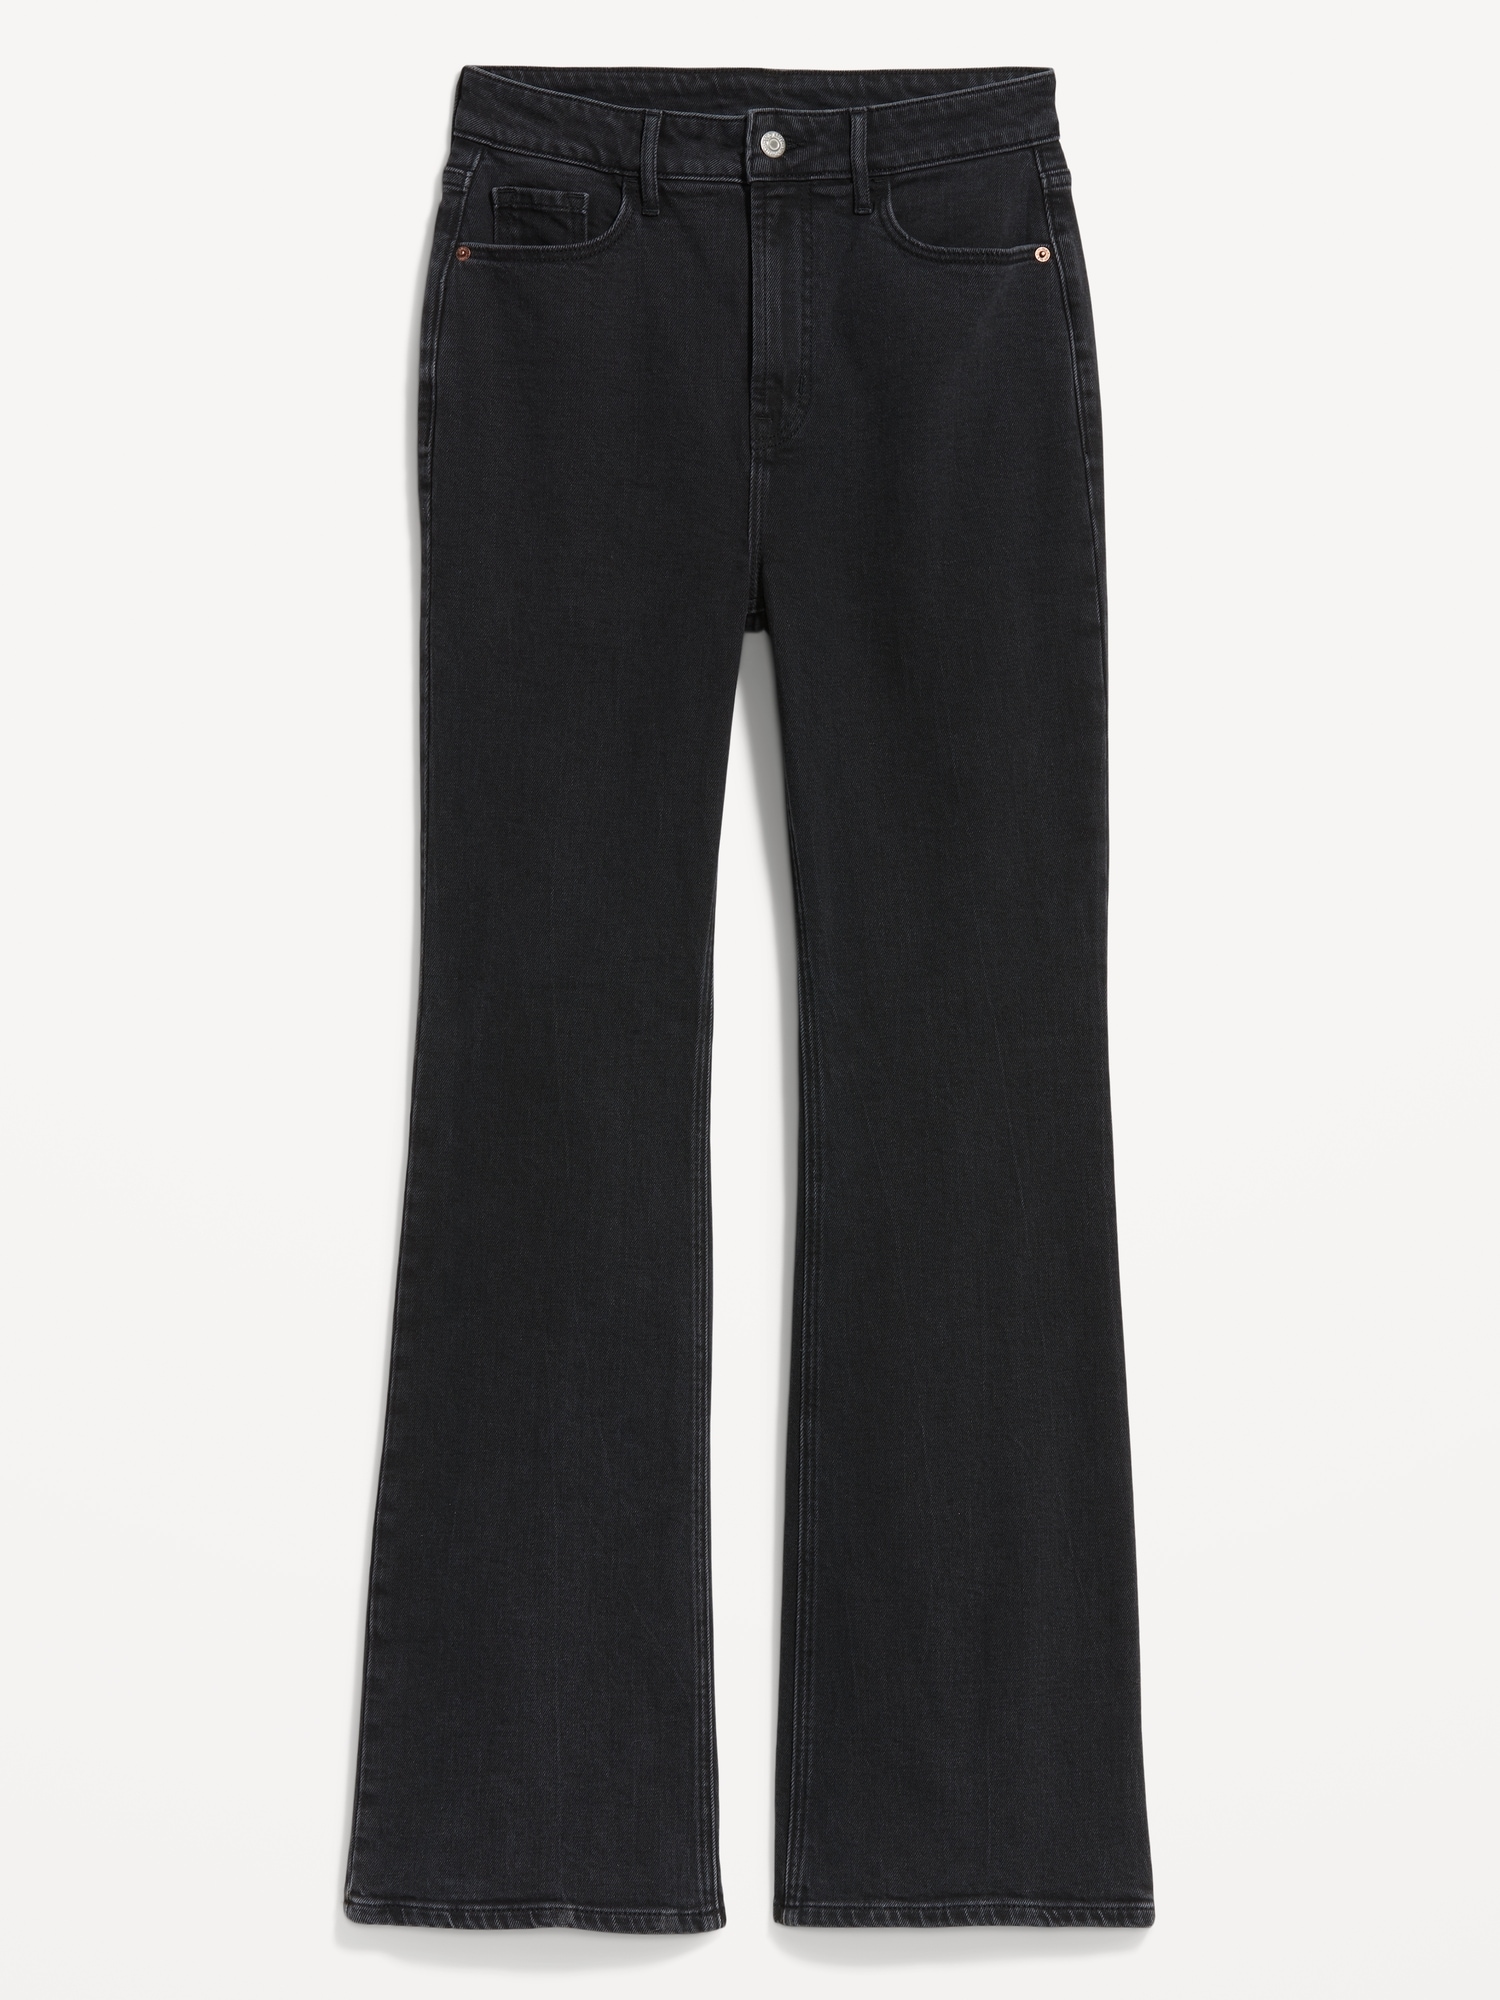 Higher High-Waisted Flare Jeans for Women | Old Navy